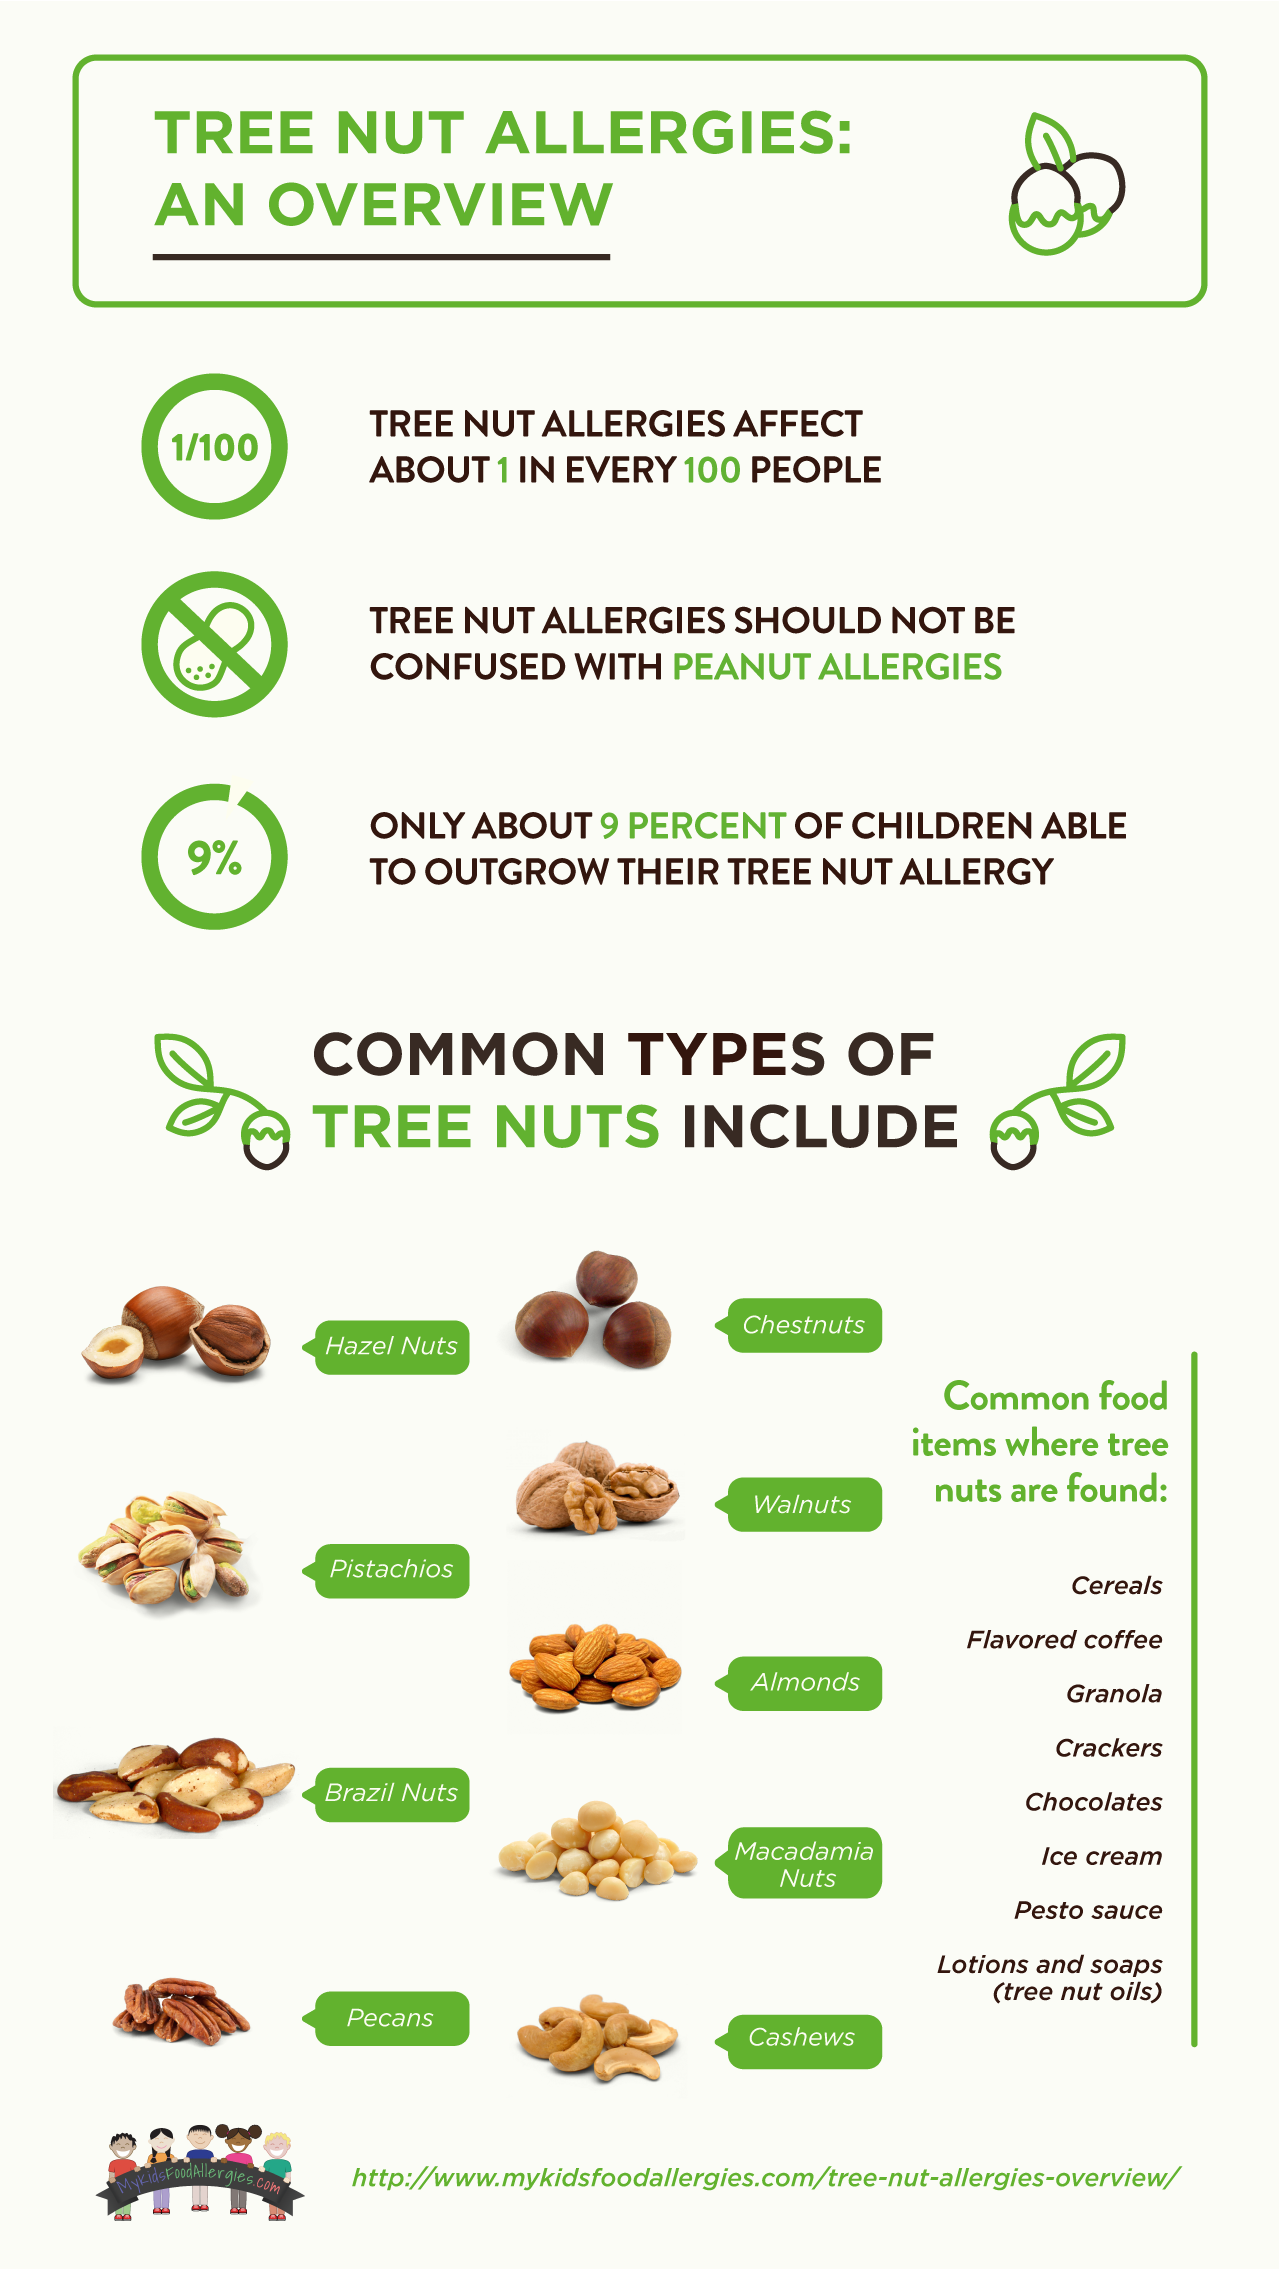 An Overview of Tree Nut Allergies